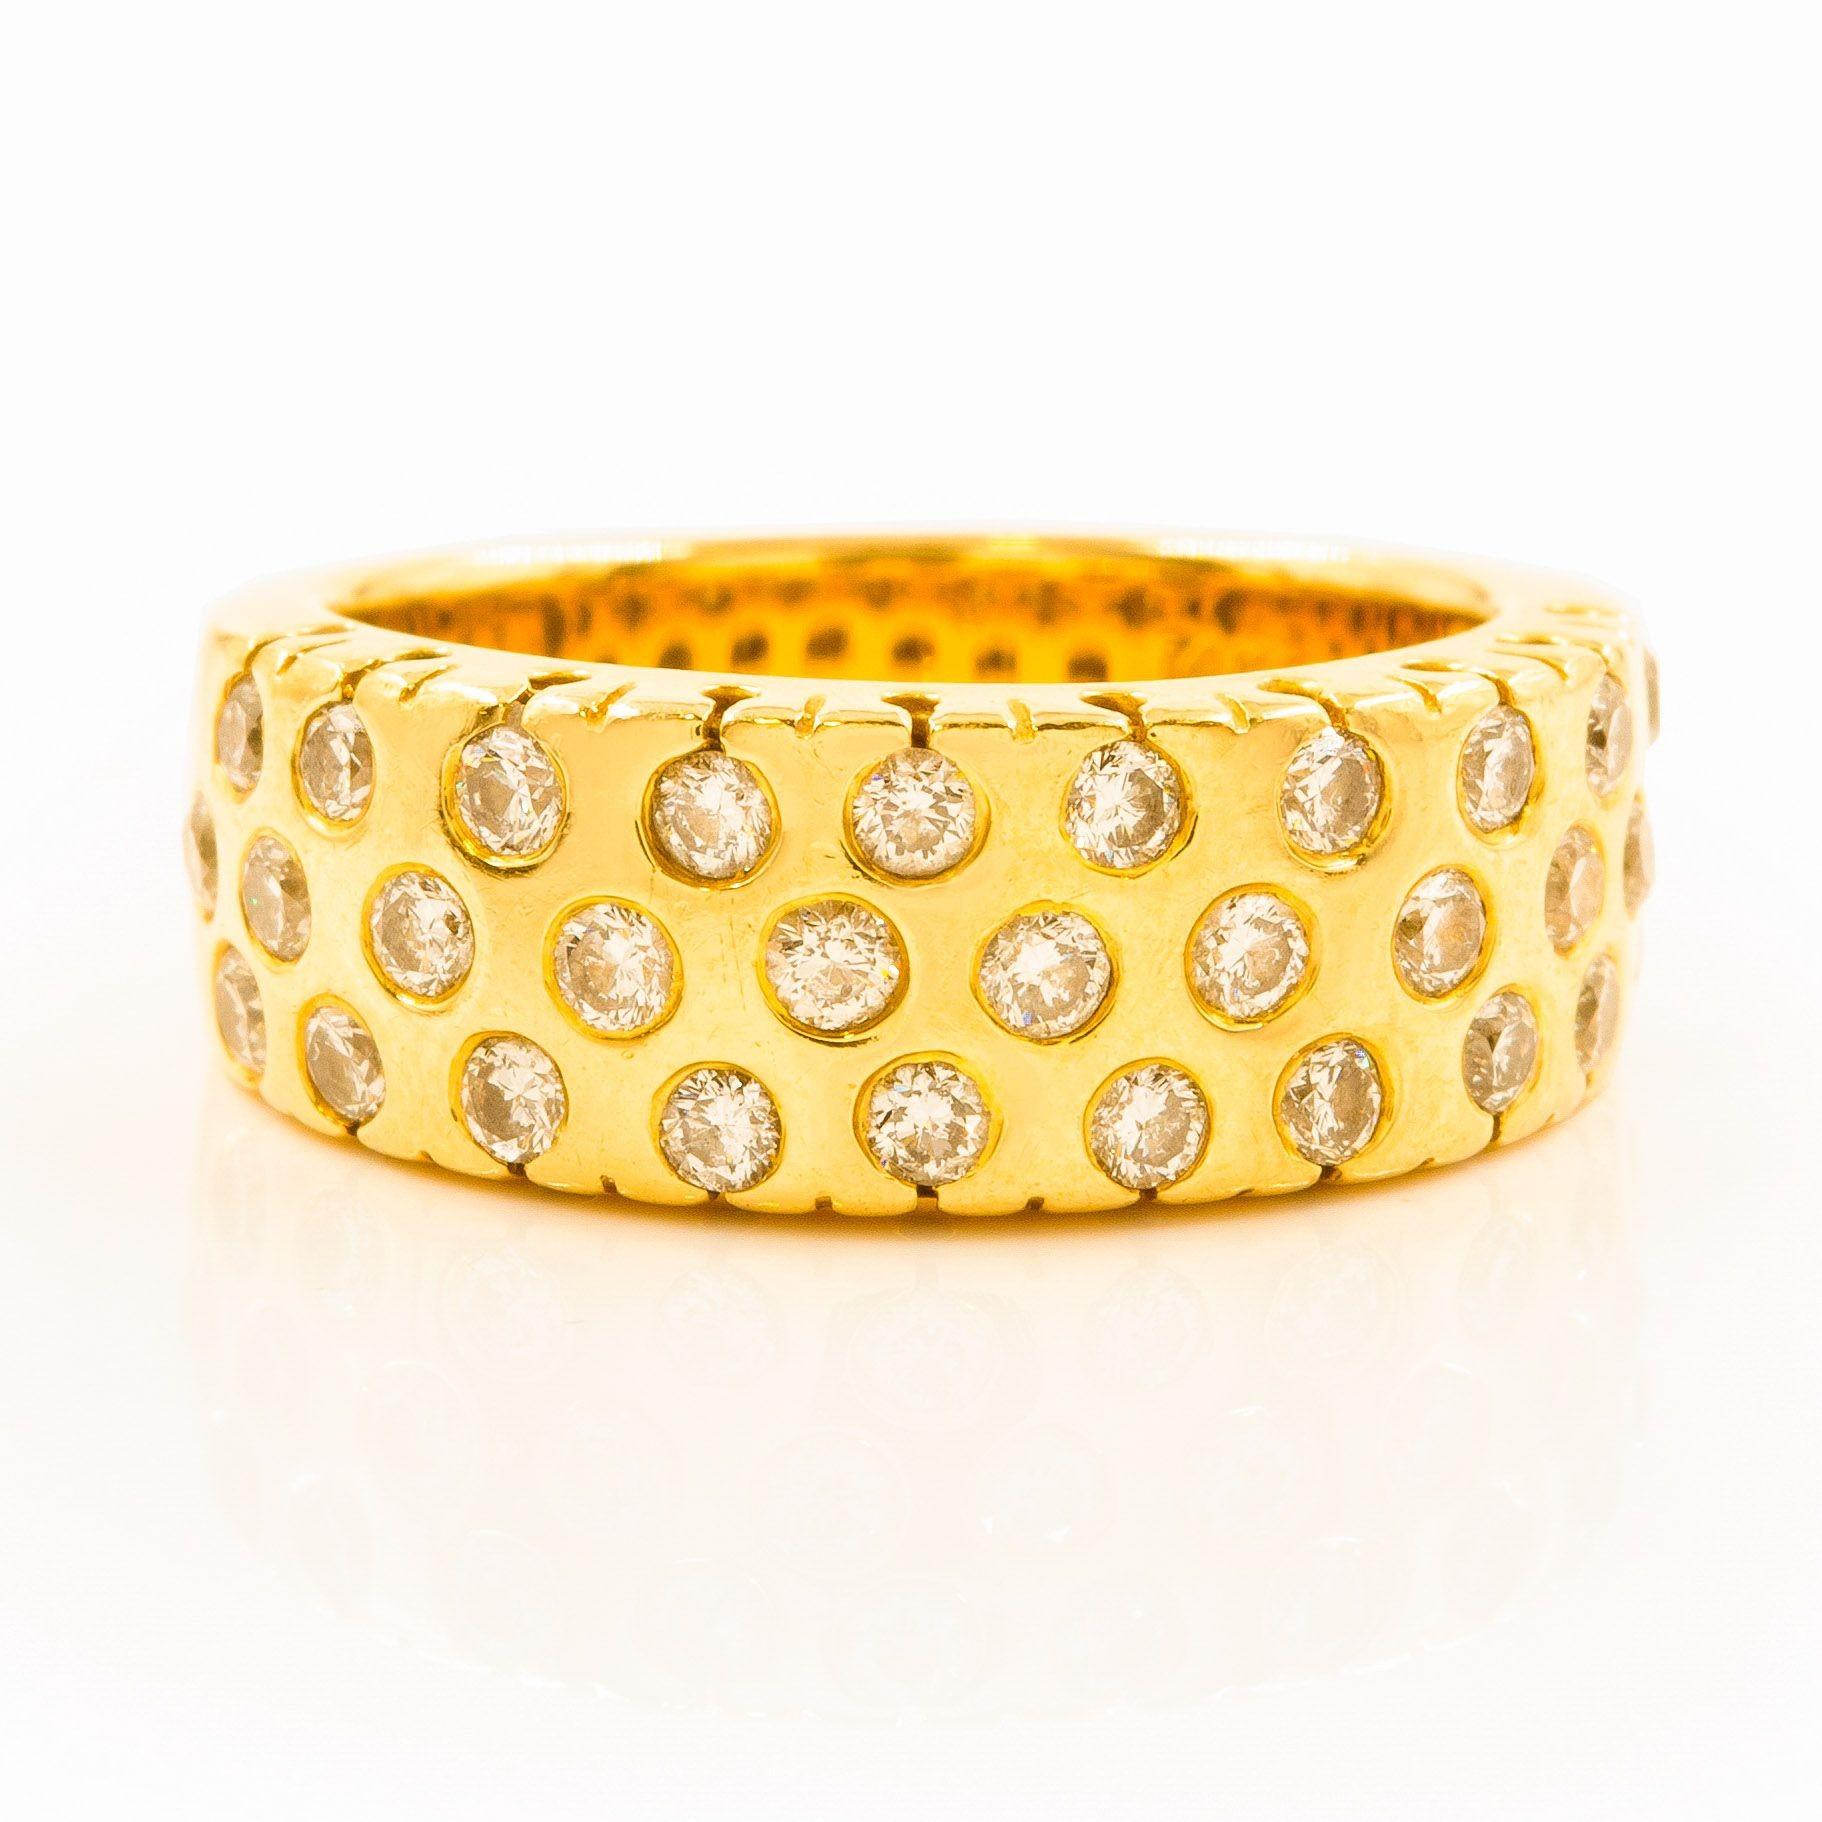 14K Yellow Gold & Gemstone Ring by Sonia Bitton, size 7
Item # C104618

A beautiful ring made of 14 karat yellow gold and studded with gemstones. The design is elegant with multiple stones set across the band, giving it a luxurious appearance. It's